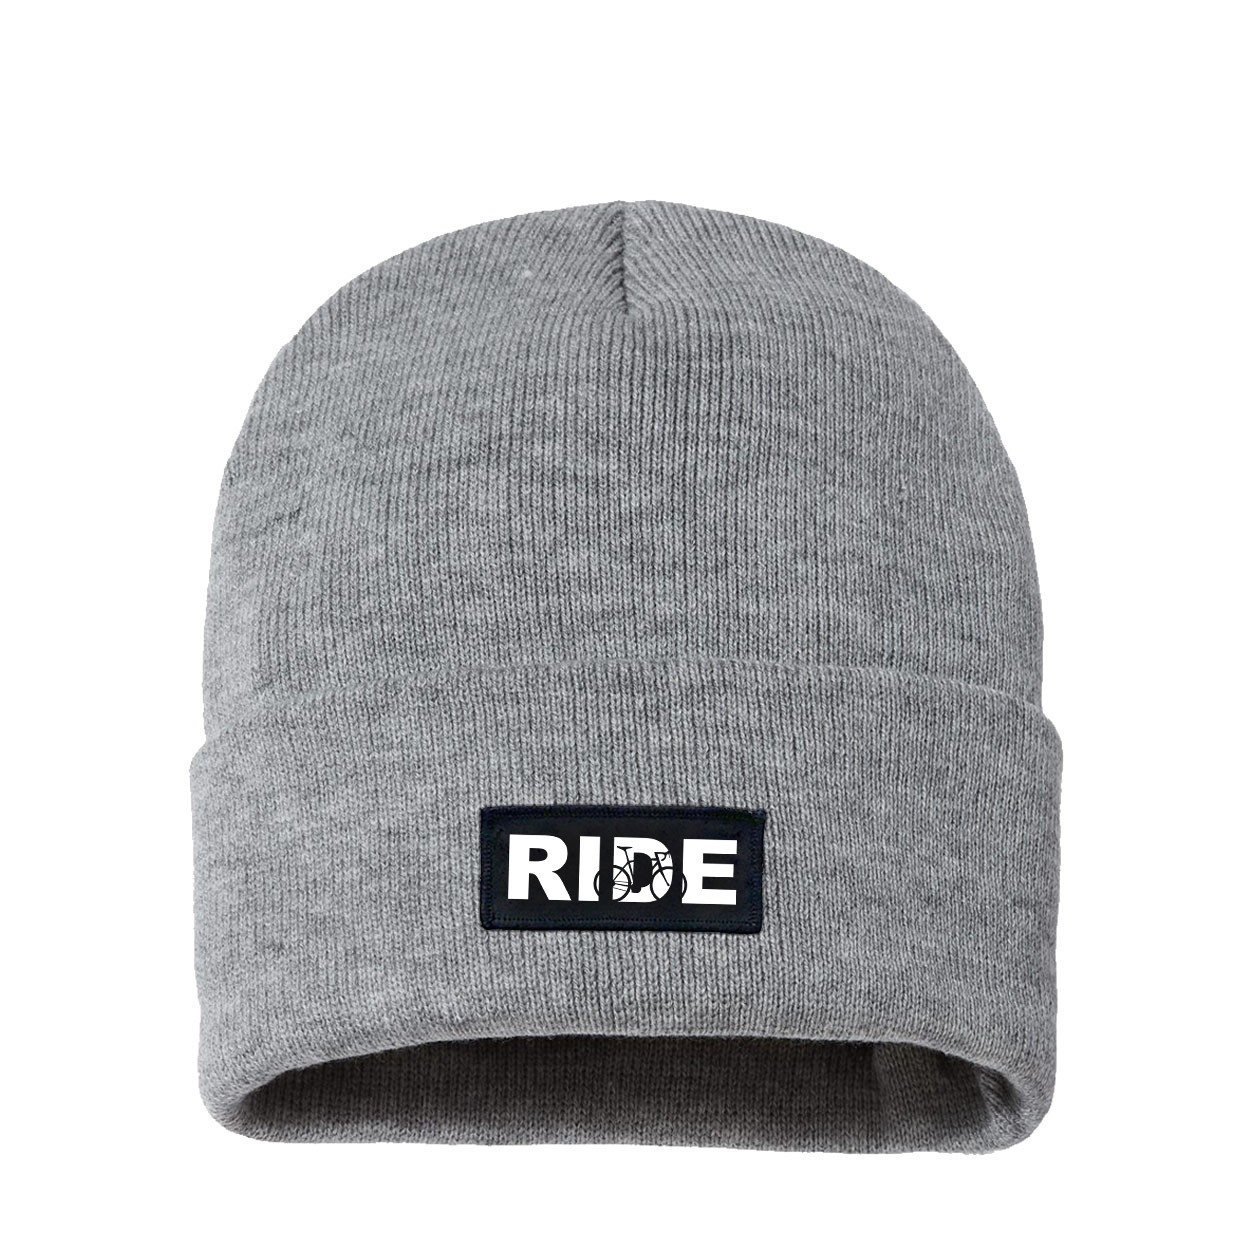 Ride Cycle Logo Night Out Woven Patch Night Out Sherpa Lined Cuffed Beanie Heather Gray (White Logo)